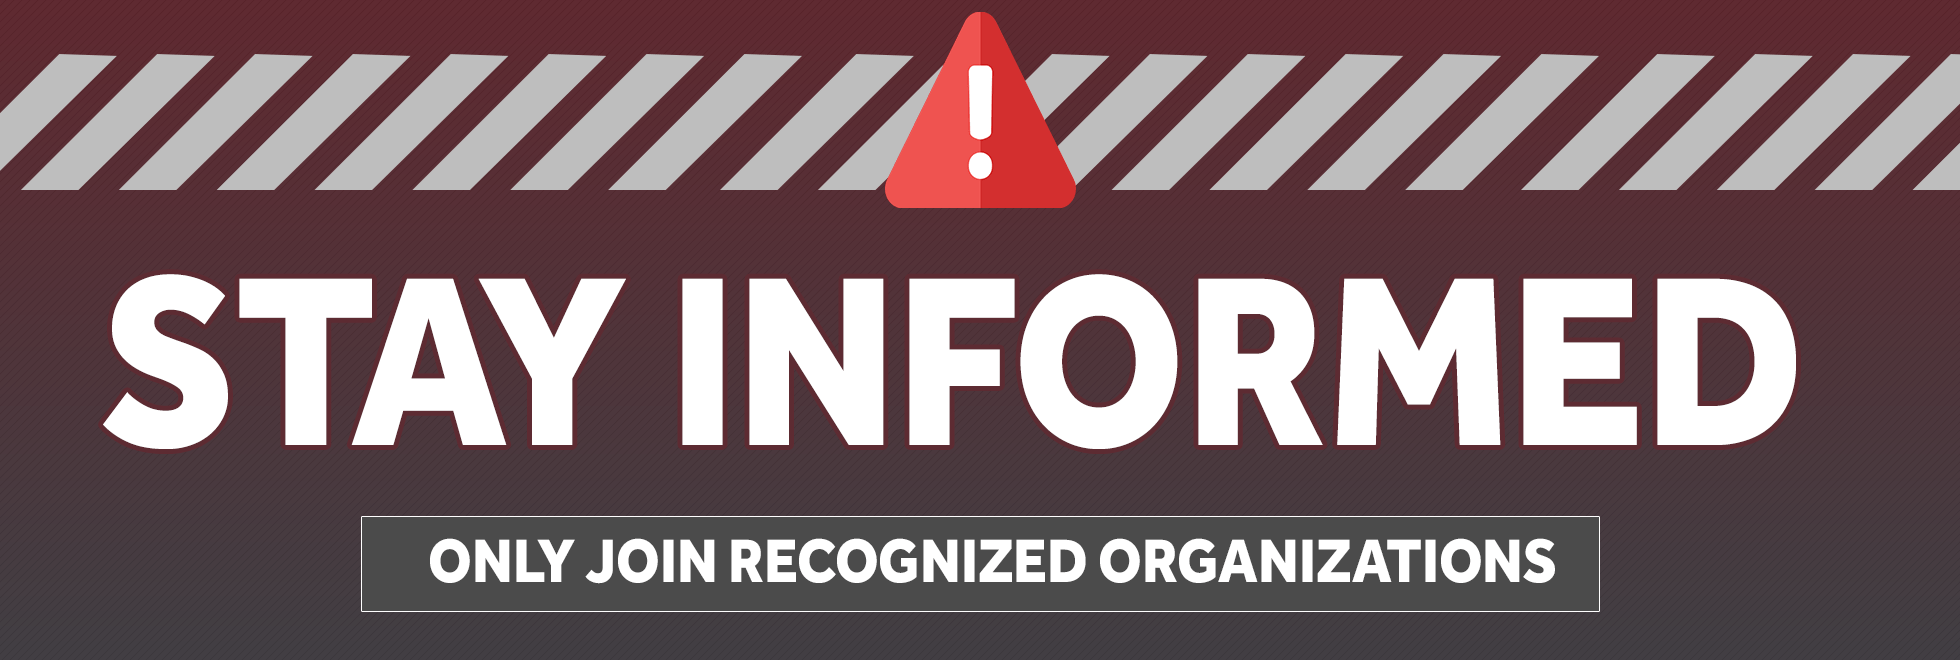 STAY INFORMED: ONLY JOIN RECOGNIZED ORGANIZATIONS